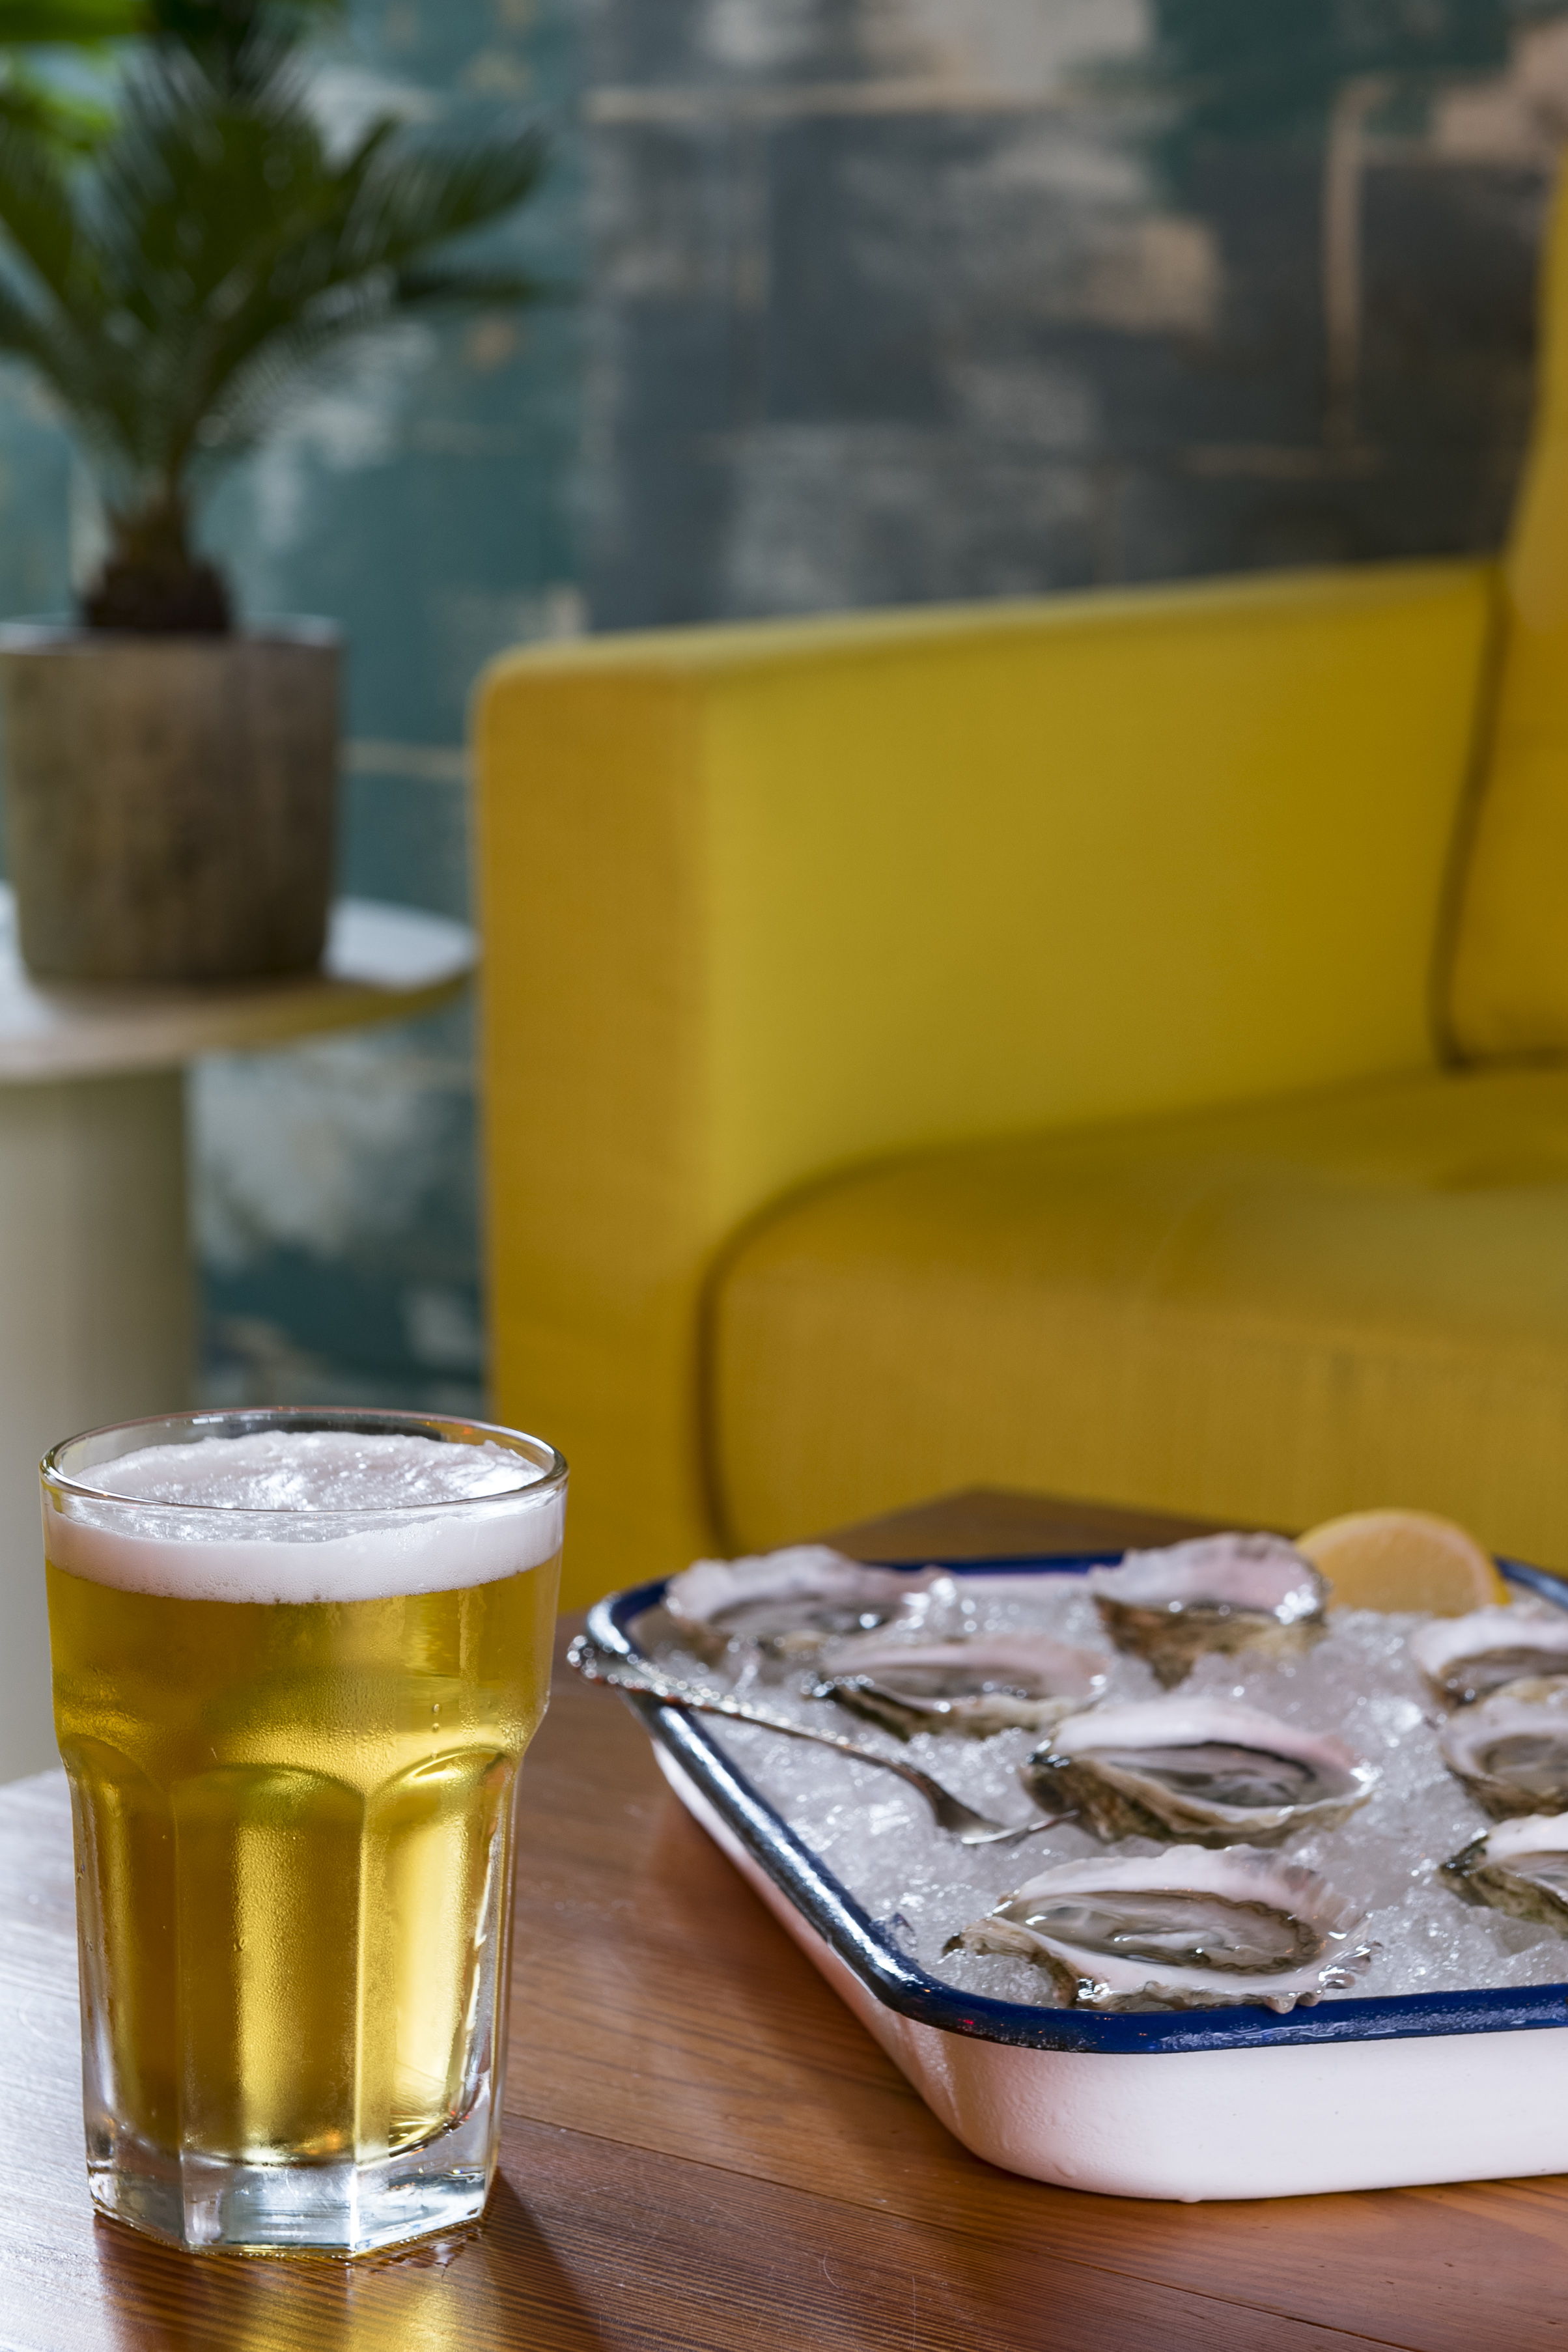 Morgan Ione | Chicago + NYC Restaurant Photographer - The Oyster Shop Beer